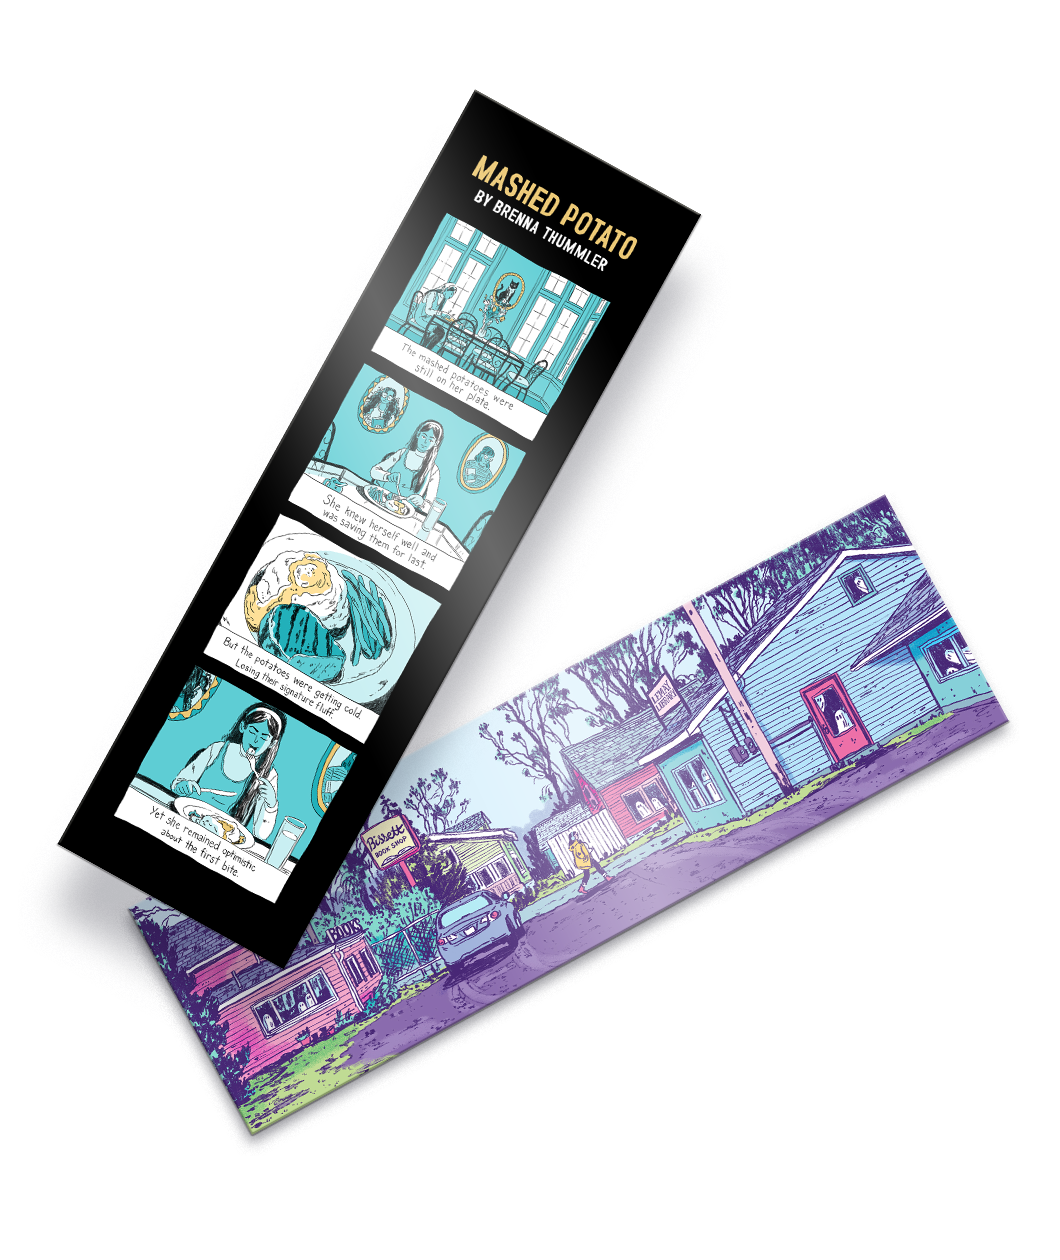 Two bookmarks, one with a blue tone comic strip design with a black background, and the other with a drawing of a girl walking through a neighborhood - by Books Unbound.